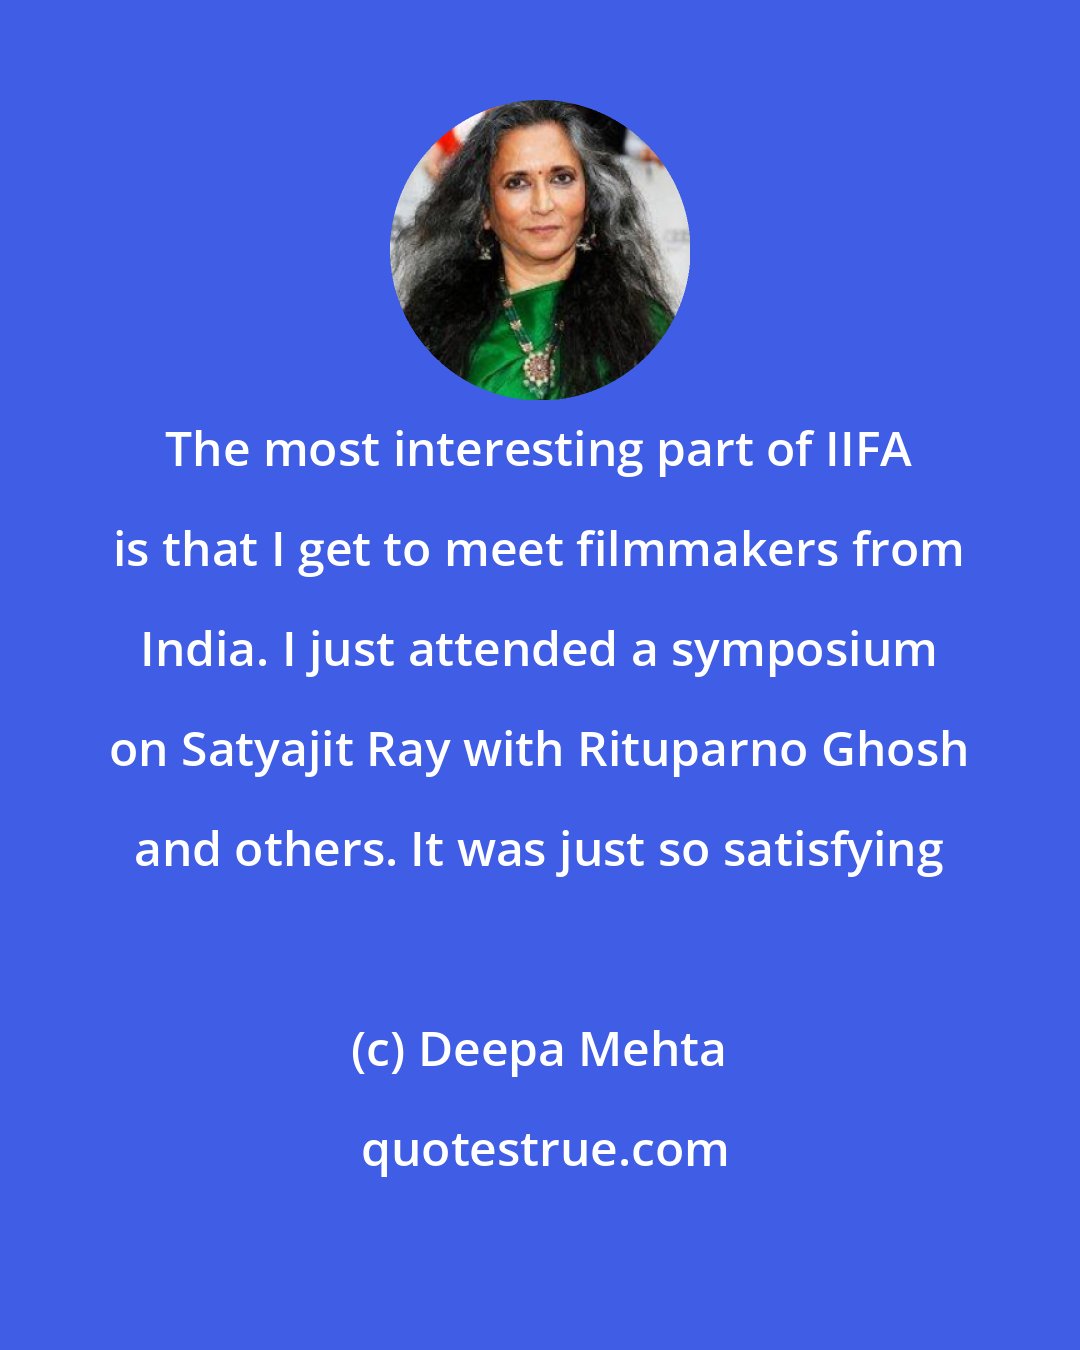 Deepa Mehta: The most interesting part of IIFA is that I get to meet filmmakers from India. I just attended a symposium on Satyajit Ray with Rituparno Ghosh and others. It was just so satisfying